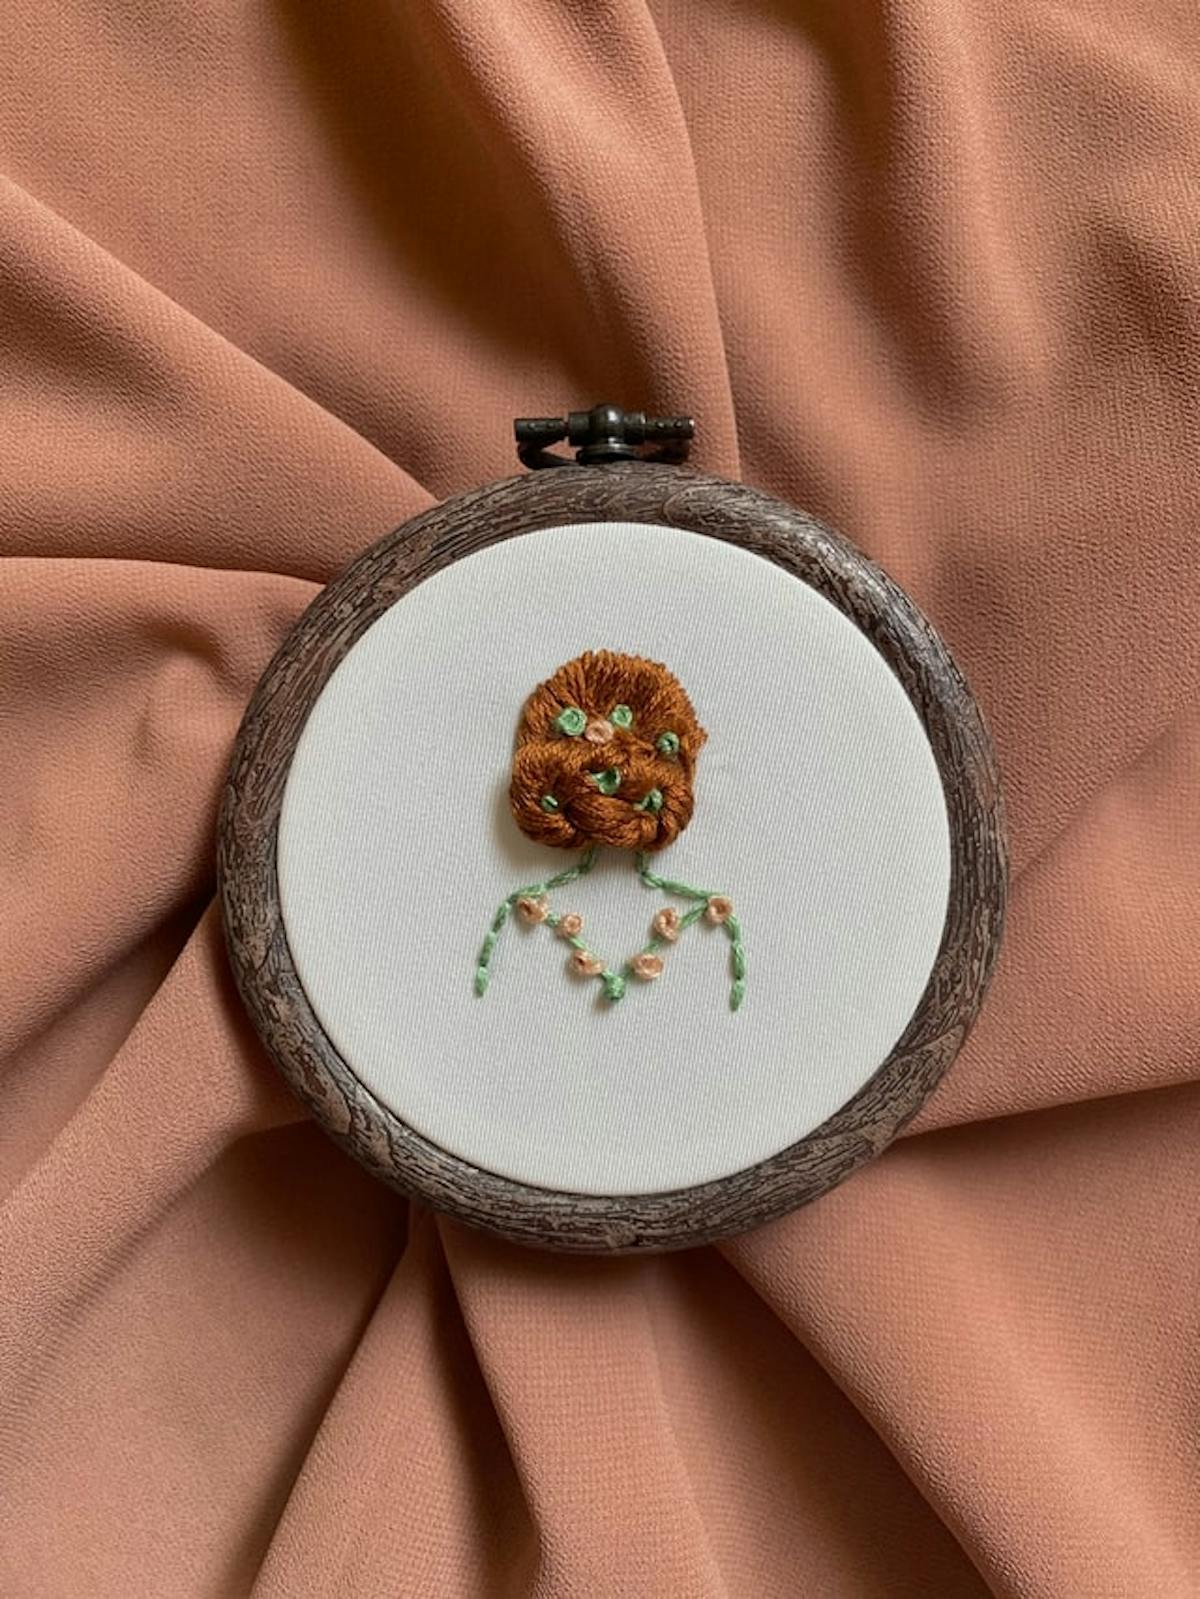  Embroidered girl with red hair in an embroidery hoop as wedding gift idea